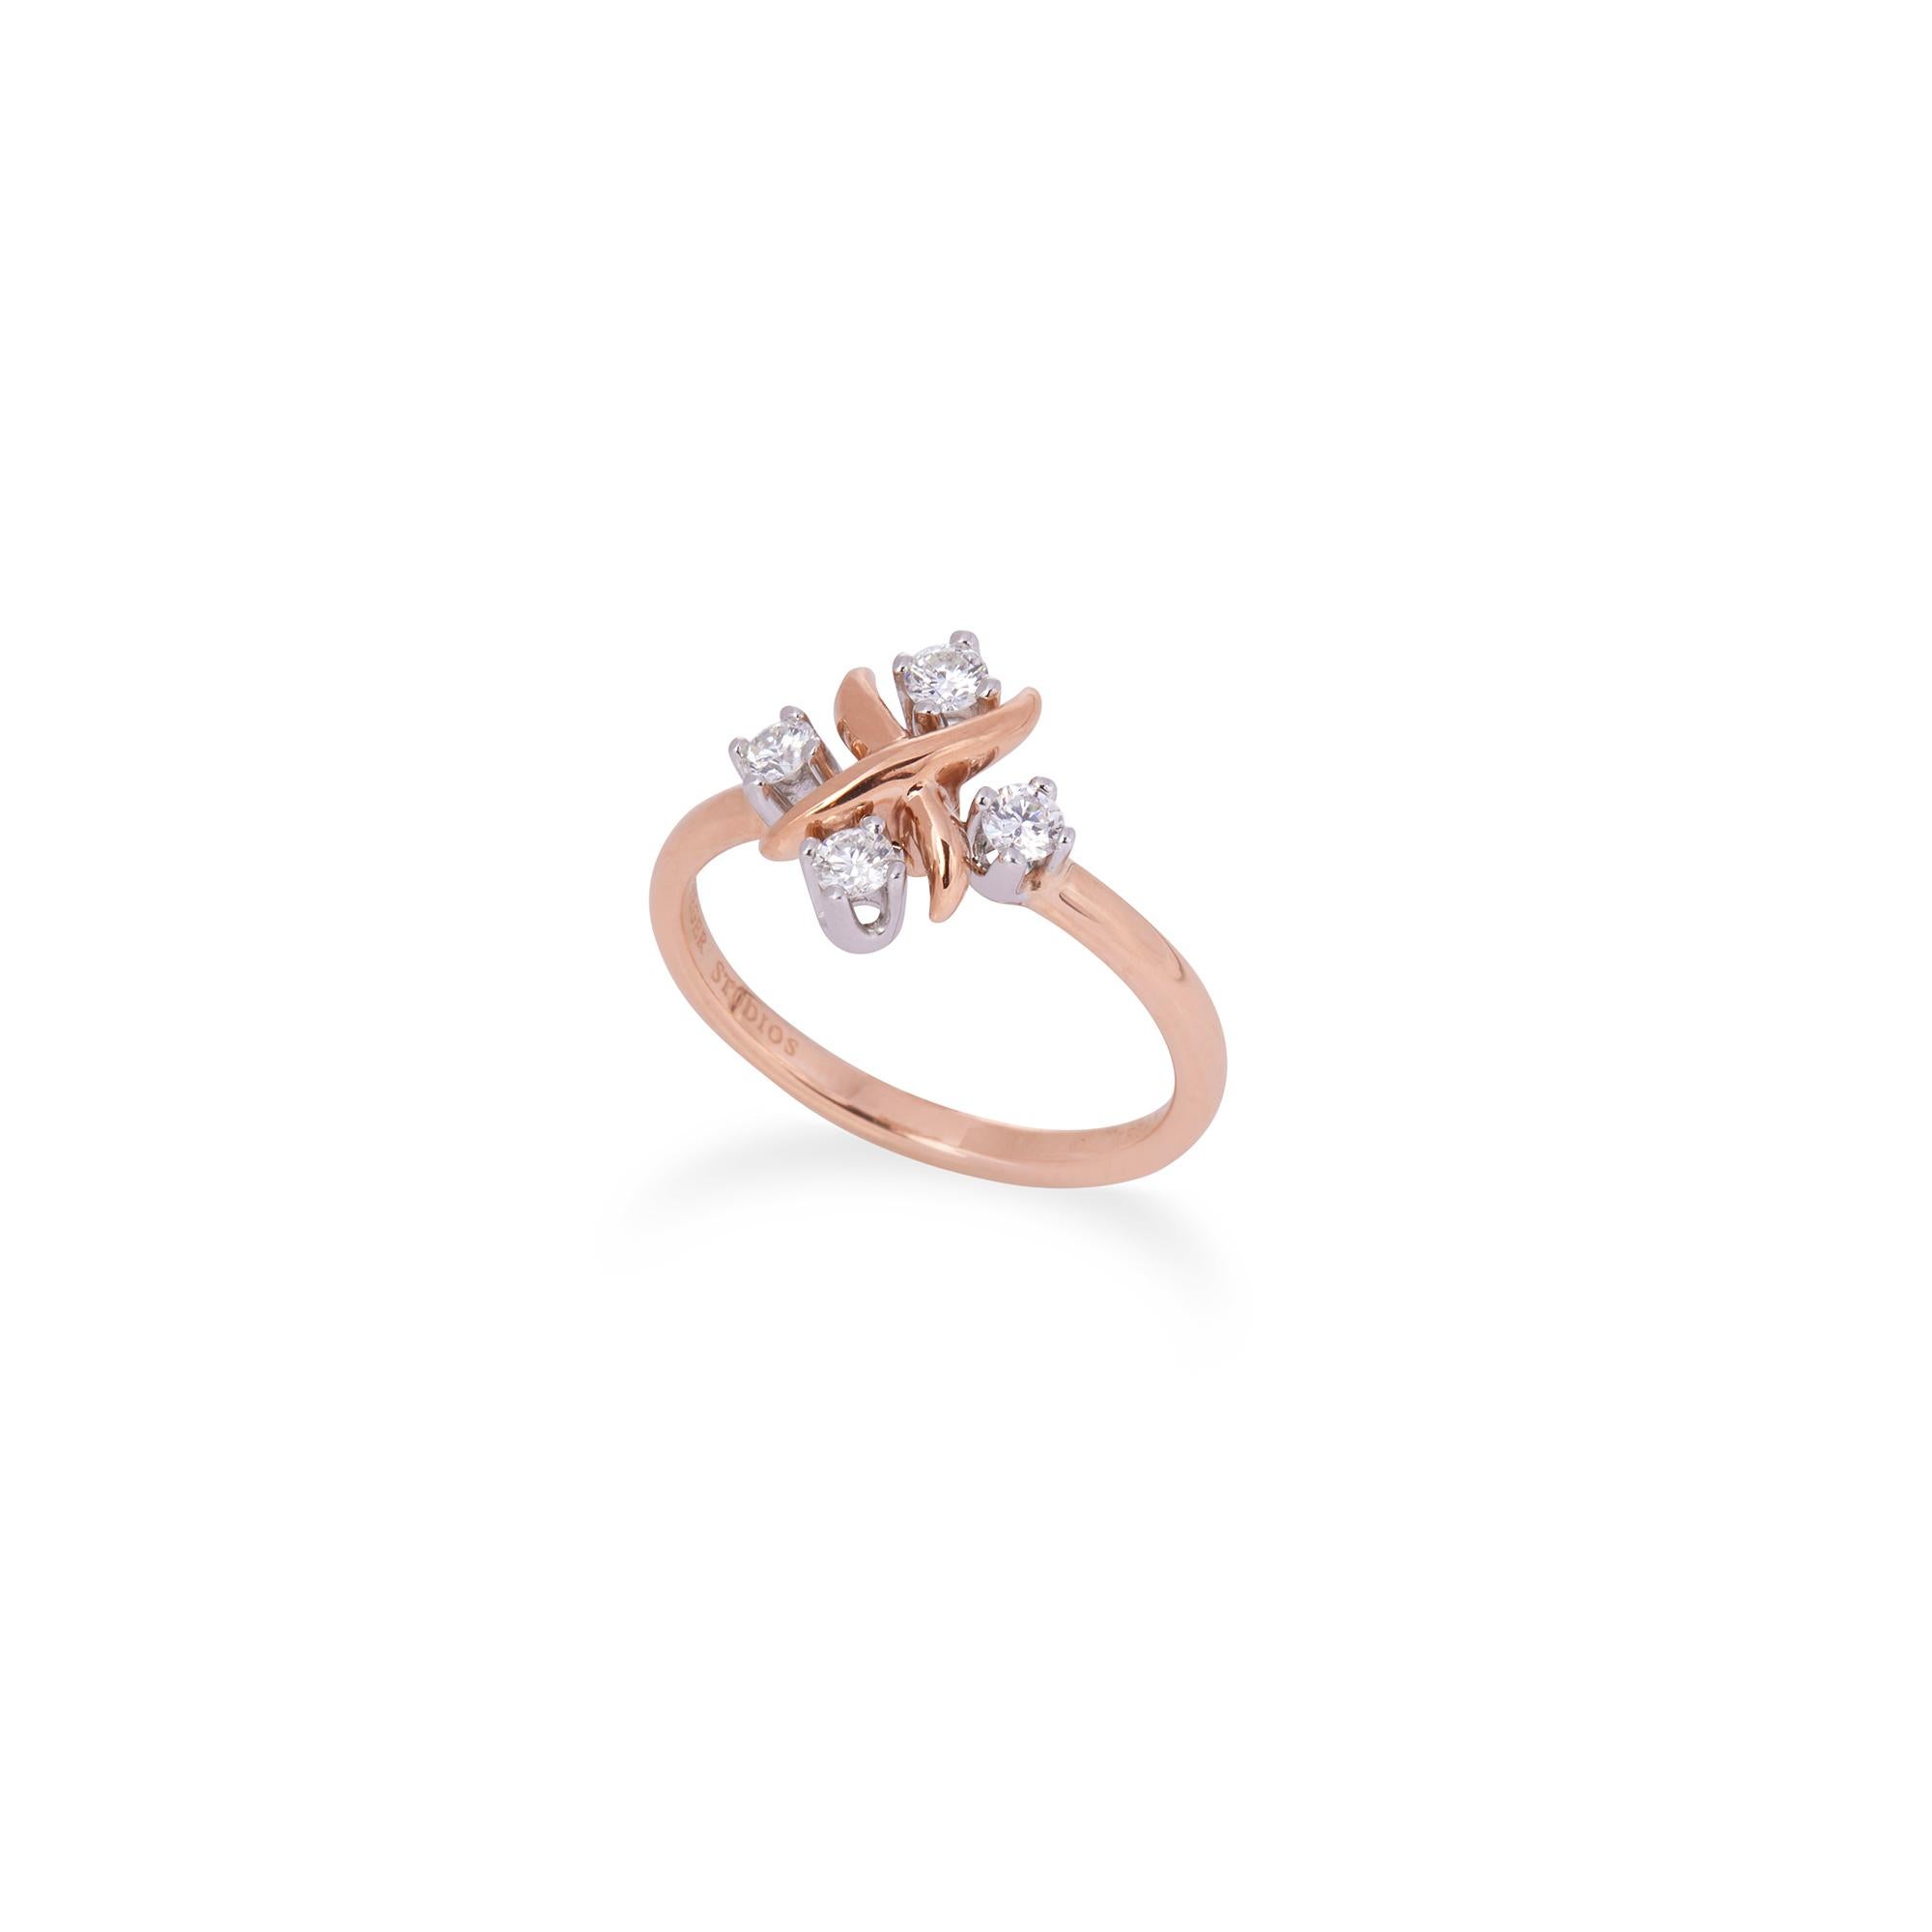 Authentic Jean Schlumberger for Tiffany & Co. Lynn ring crafted in 18 karat rose gold and platinum.  The 'X' design is set with four round brilliant diamonds of an estimated .20 total carats.  US size 5 1/2.  Signed Schlumberger Studios, Tiffany &